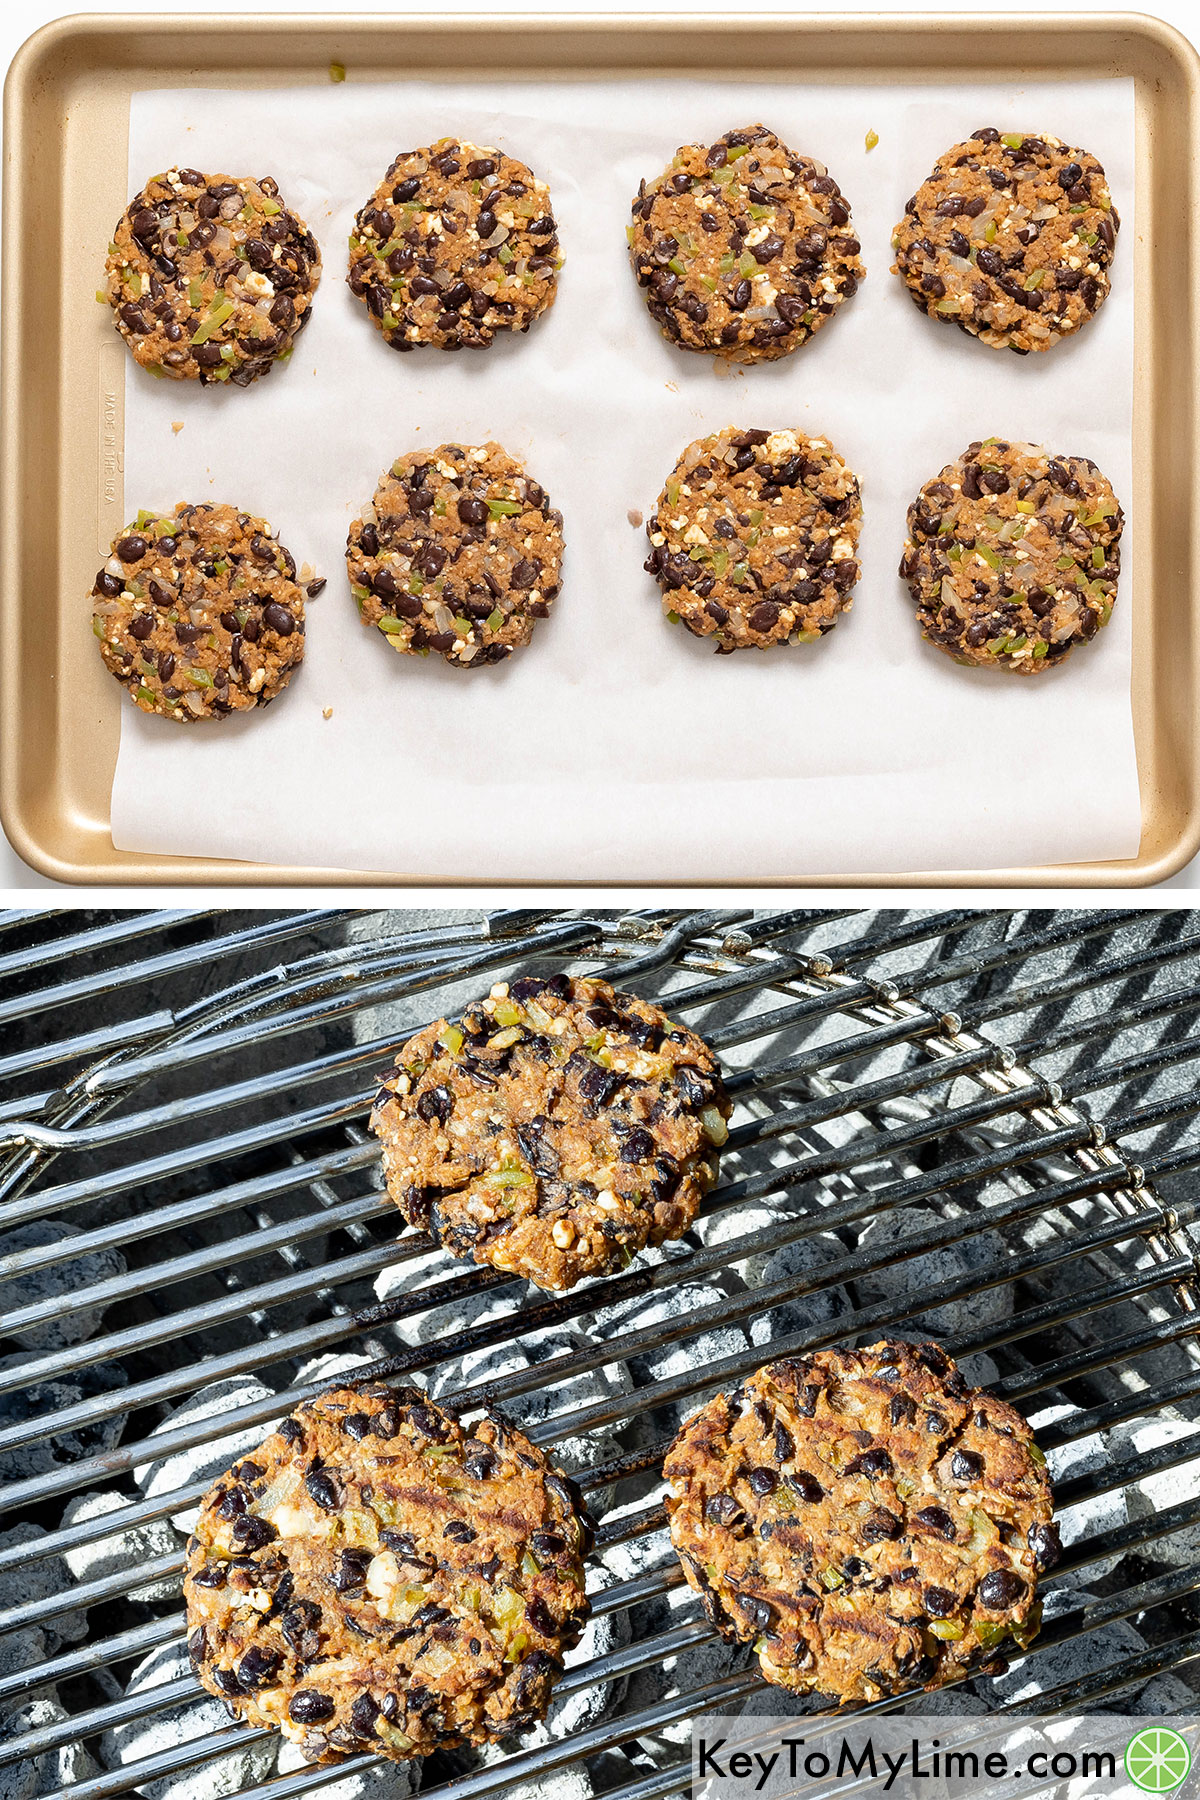 Forming black bean patties and then grilling them.